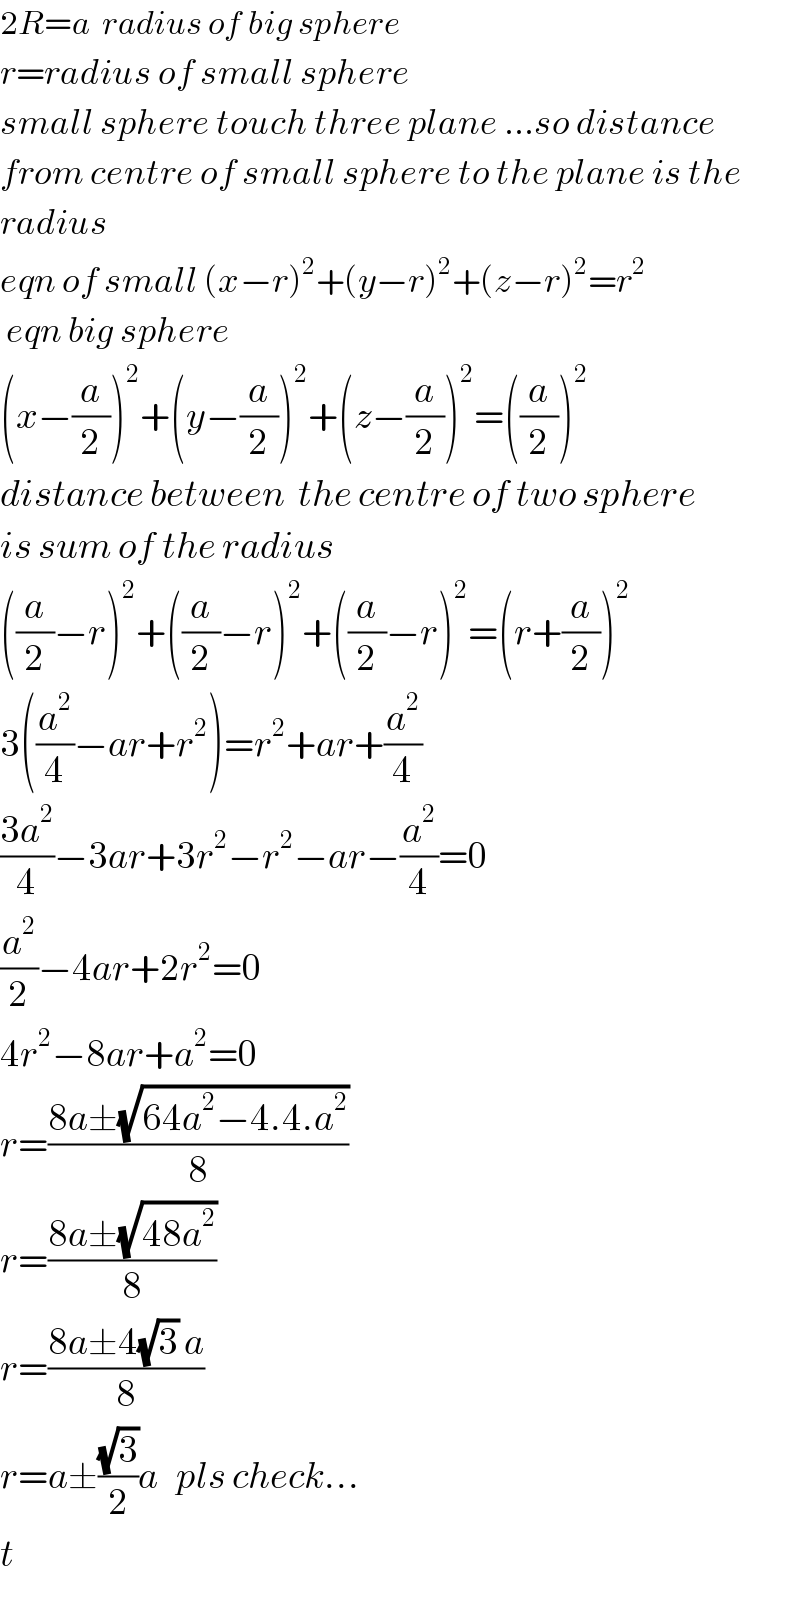 2R=a  radius of big sphere  r=radius of small sphere  small sphere touch three plane ...so distance  from centre of small sphere to the plane is the  radius  eqn of small (x−r)^2 +(y−r)^2 +(z−r)^2 =r^2    eqn big sphere  (x−(a/2))^2 +(y−(a/2))^2 +(z−(a/2))^2 =((a/2))^2   distance between  the centre of two sphere  is sum of the radius  ((a/2)−r)^2 +((a/2)−r)^2 +((a/2)−r)^2 =(r+(a/2))^2   3((a^2 /4)−ar+r^2 )=r^2 +ar+(a^2 /4)  ((3a^2 )/4)−3ar+3r^2 −r^2 −ar−(a^2 /4)=0  (a^2 /2)−4ar+2r^2 =0  4r^2 −8ar+a^2 =0  r=((8a±(√(64a^2 −4.4.a^2 )))/8)  r=((8a±(√(48a^2 )))/8)  r=((8a±4(√3) a)/8)  r=a±((√3)/2)a   pls check...  t  